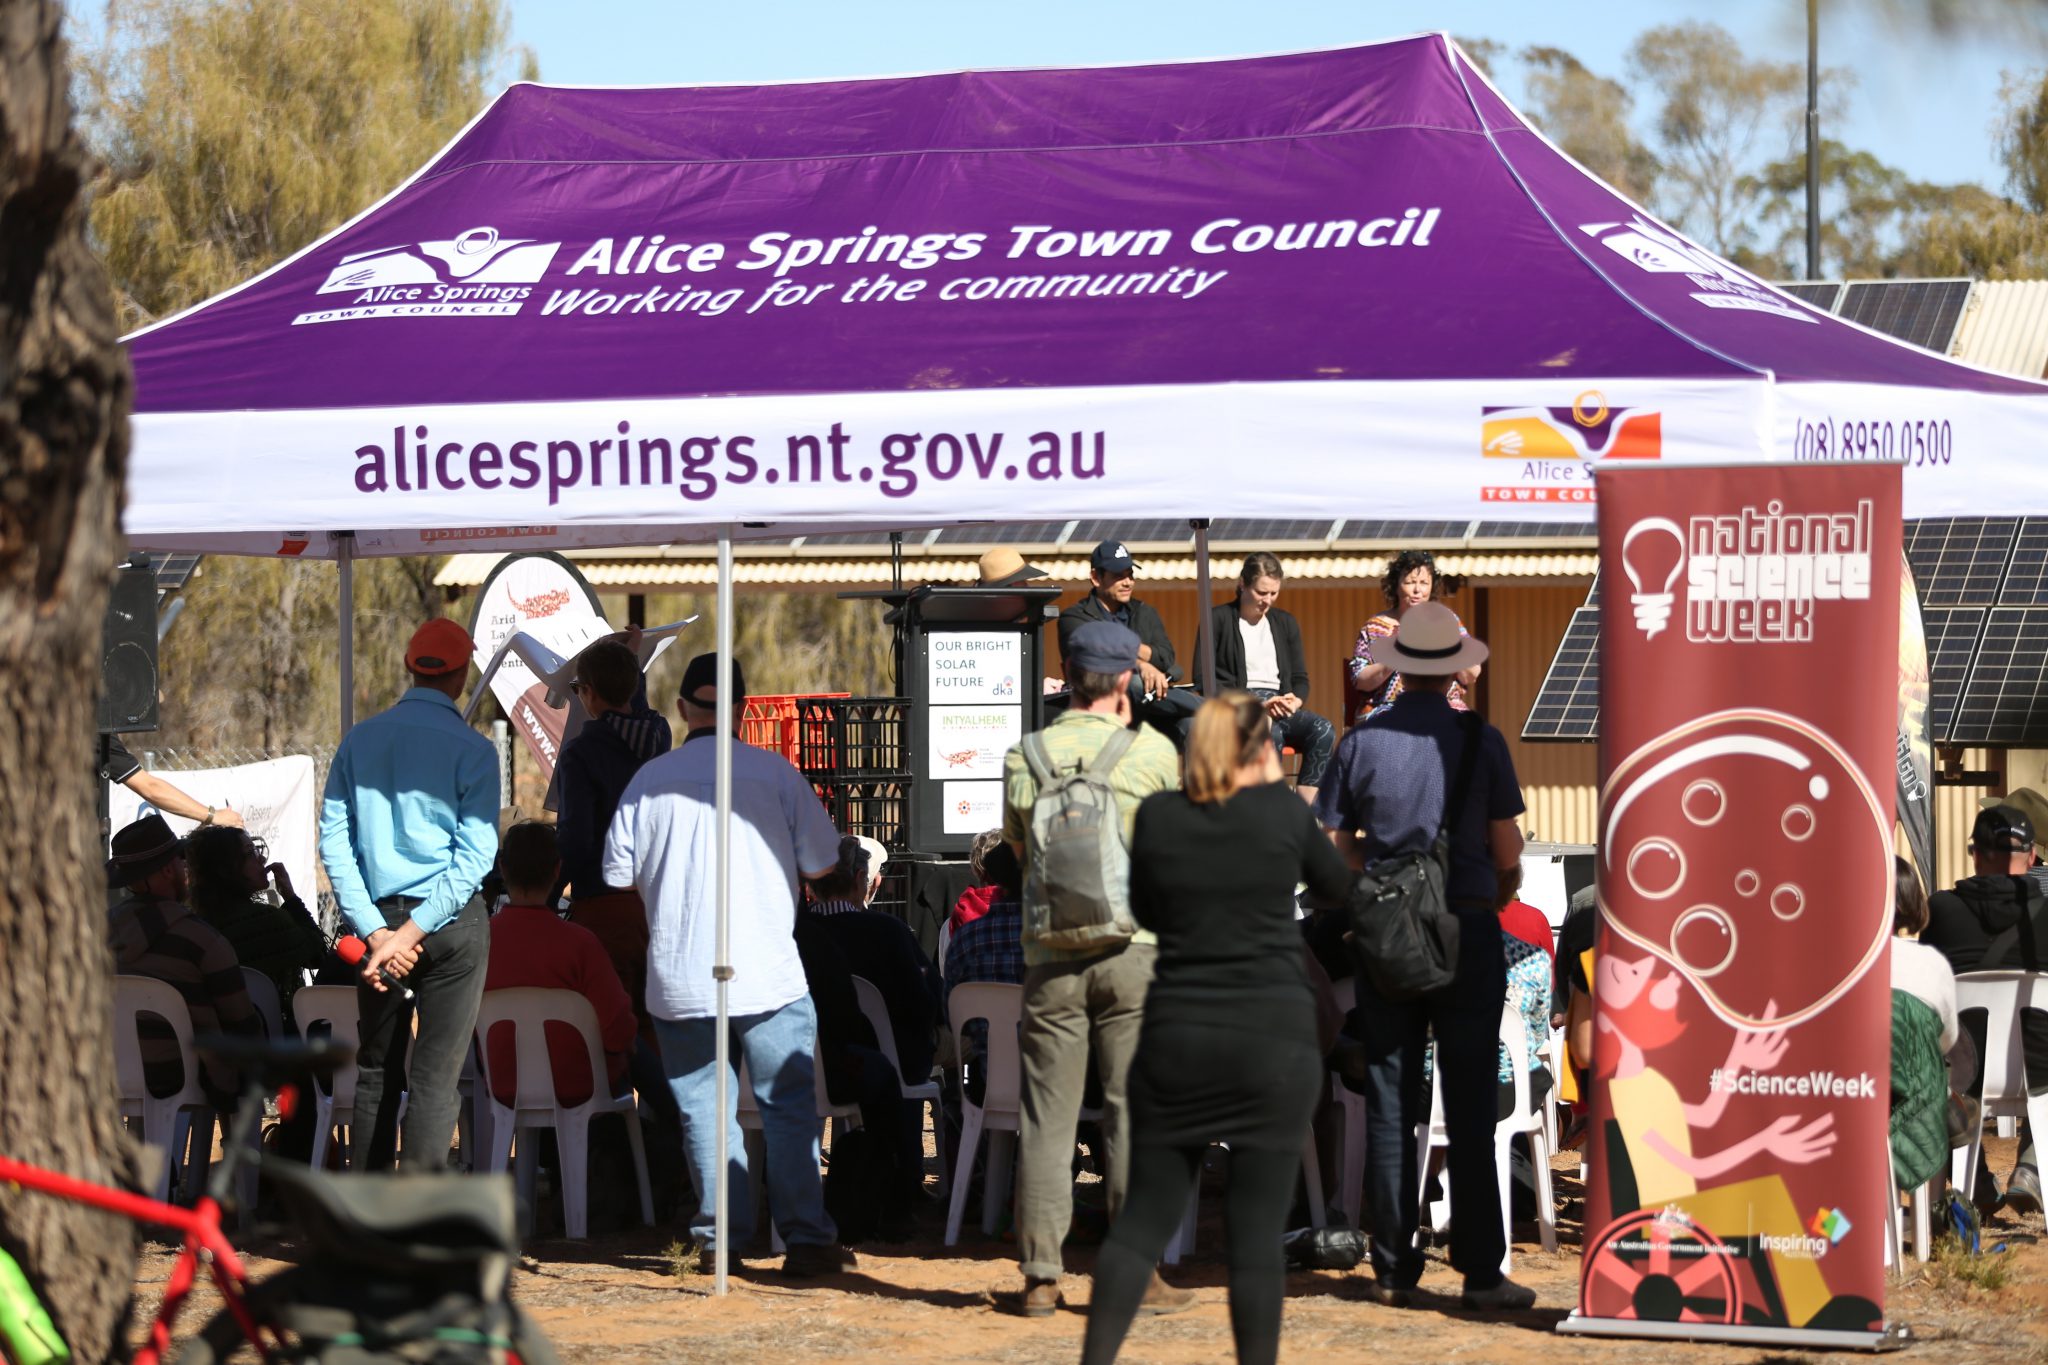 Tent at event in Alice Springs